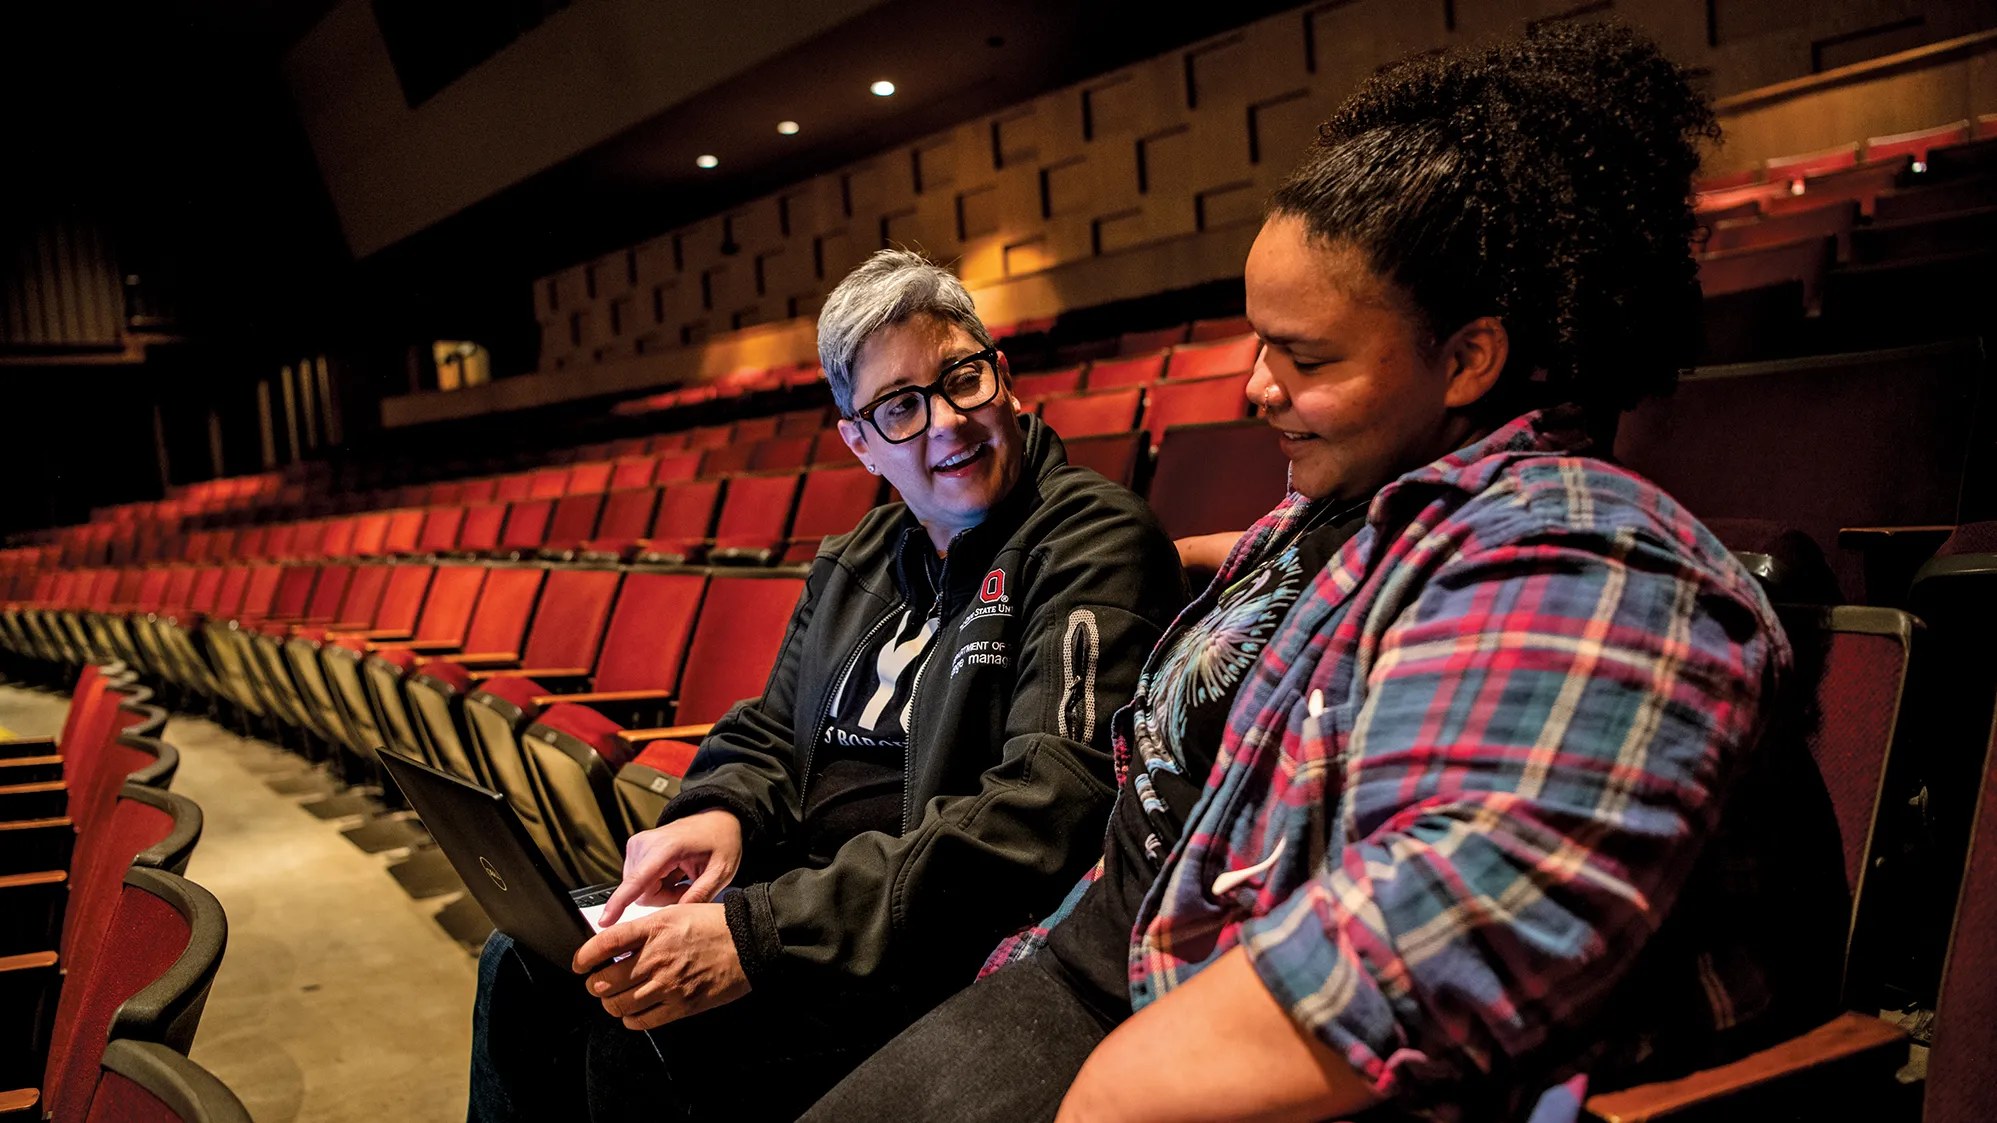 Sitting at the end of a row of chairs in a theatre, teacher Sherée Greco, a white woman with short gray hair and thick-rimmed glasses, points to a laptop screen she’s holding and talks with a student, a young Black woman with a curly pony tail. They’re angled slightly toward each other and both are smiling — the younger woman is looking down as if she’s listening intently and perhaps slightly embarrassed but pleased by what’s being said.